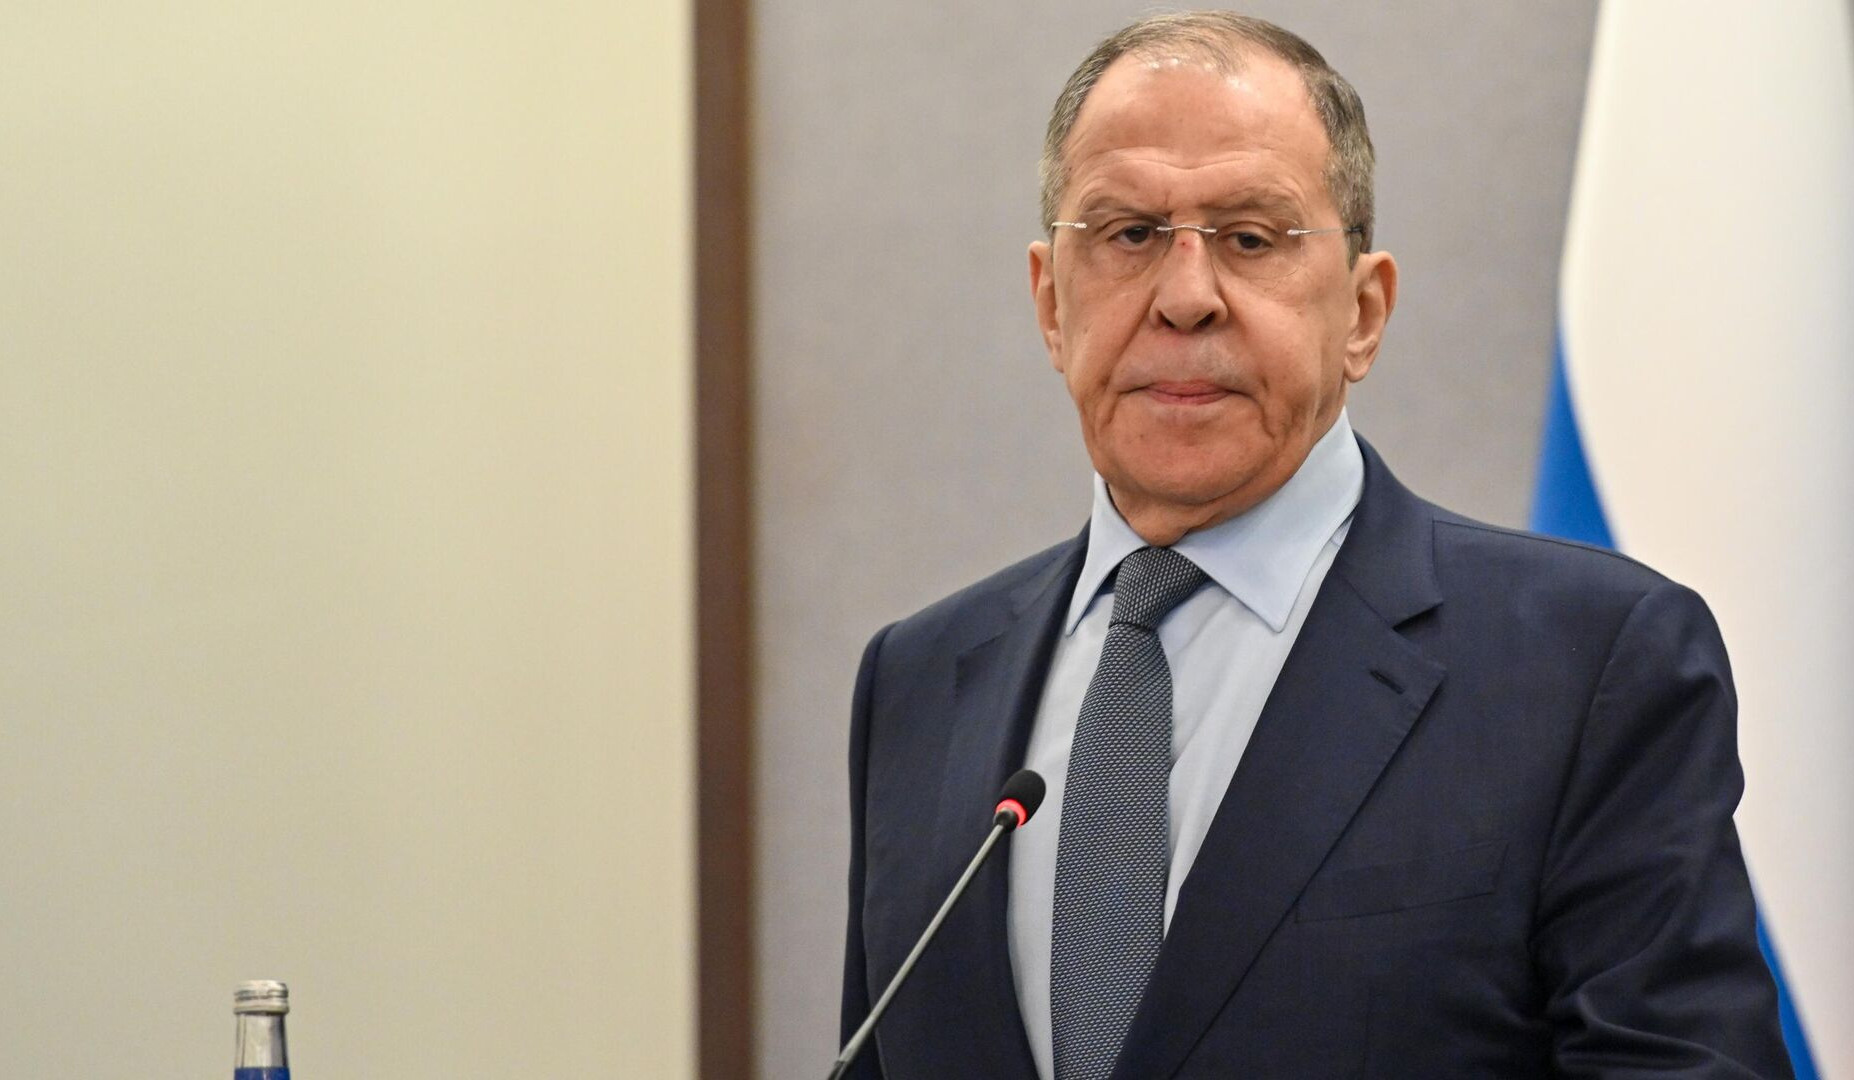 The European Union openly abuses relations with Armenia and Azerbaijan, Lavrov